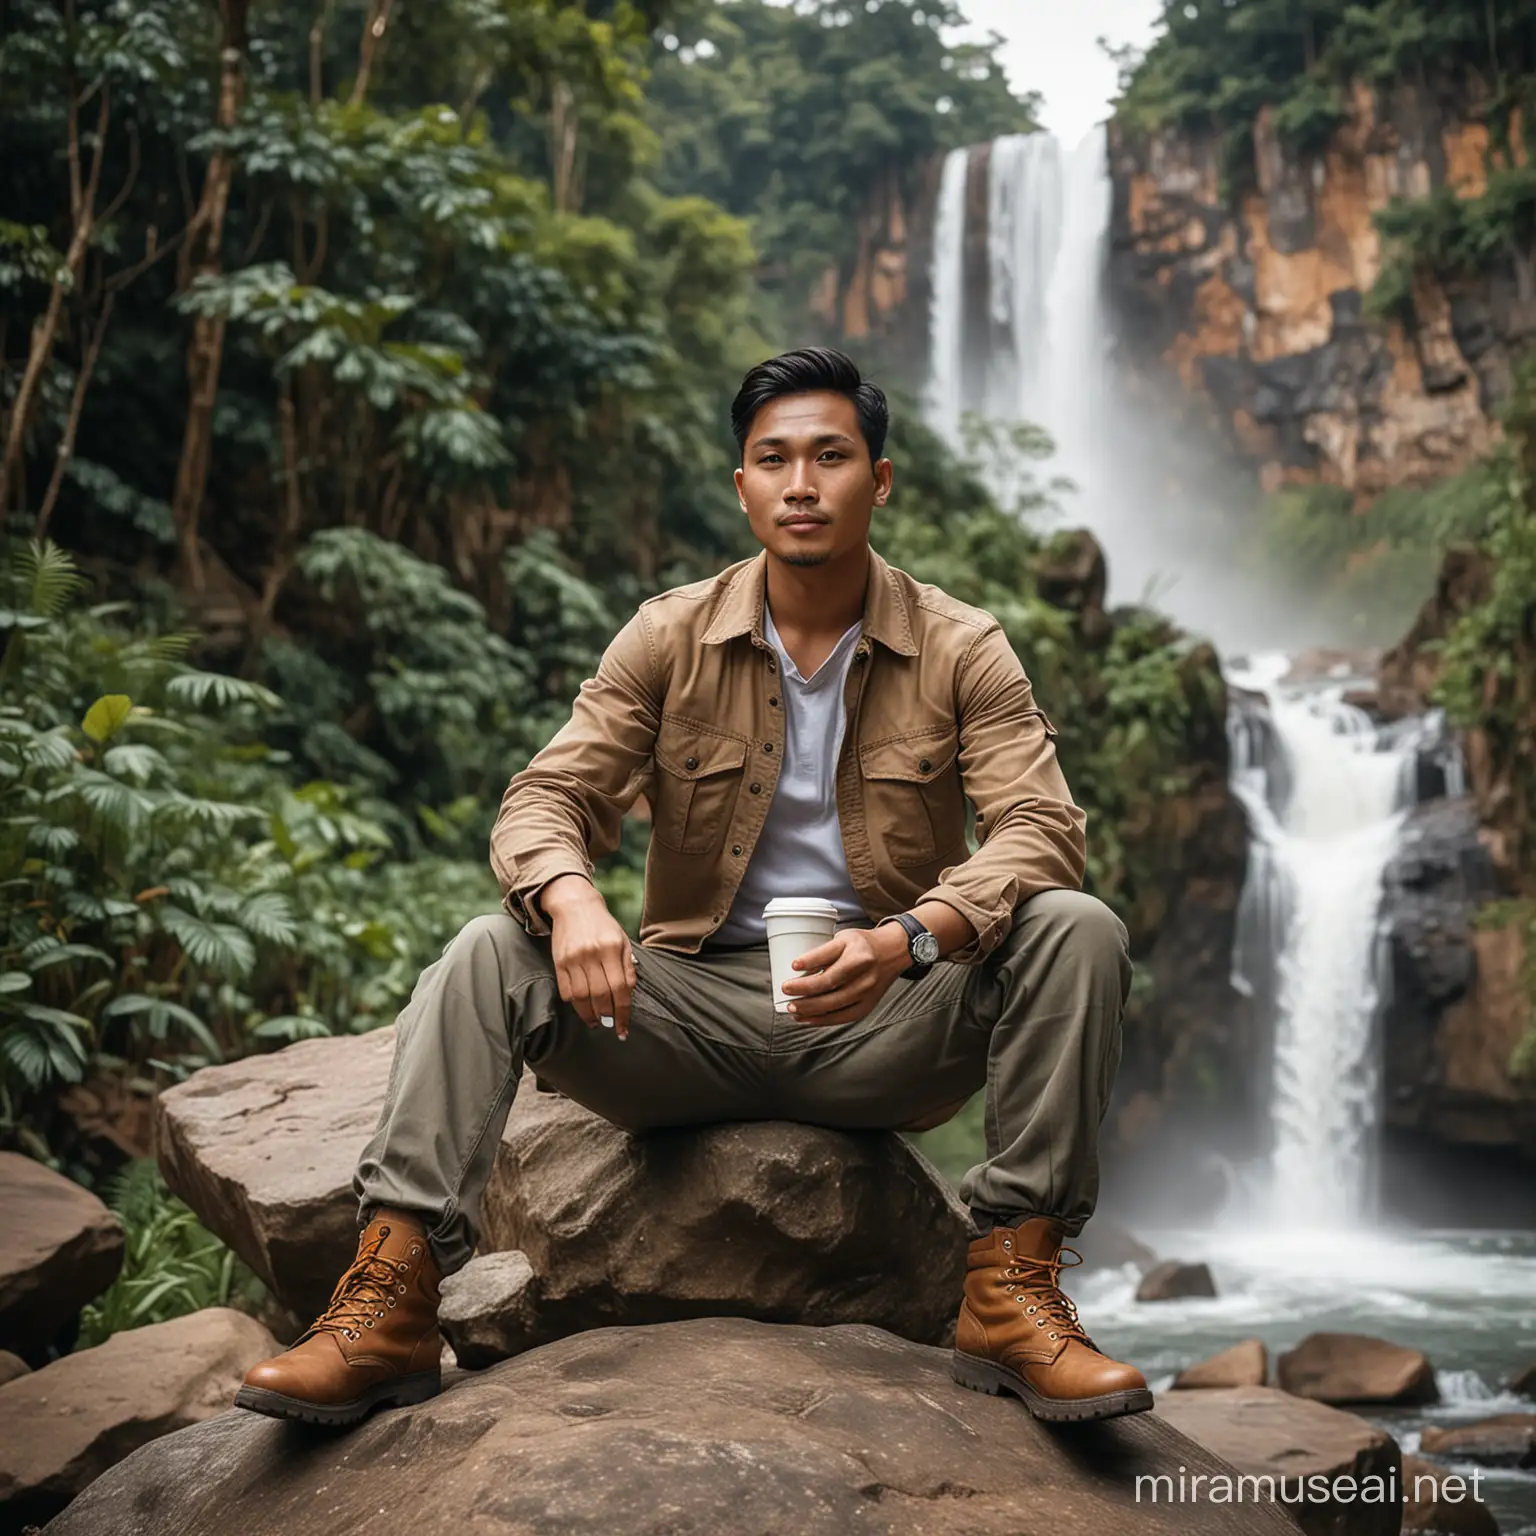 Indonesian Man Relaxing by Waterfall with Coffee and Cigarette